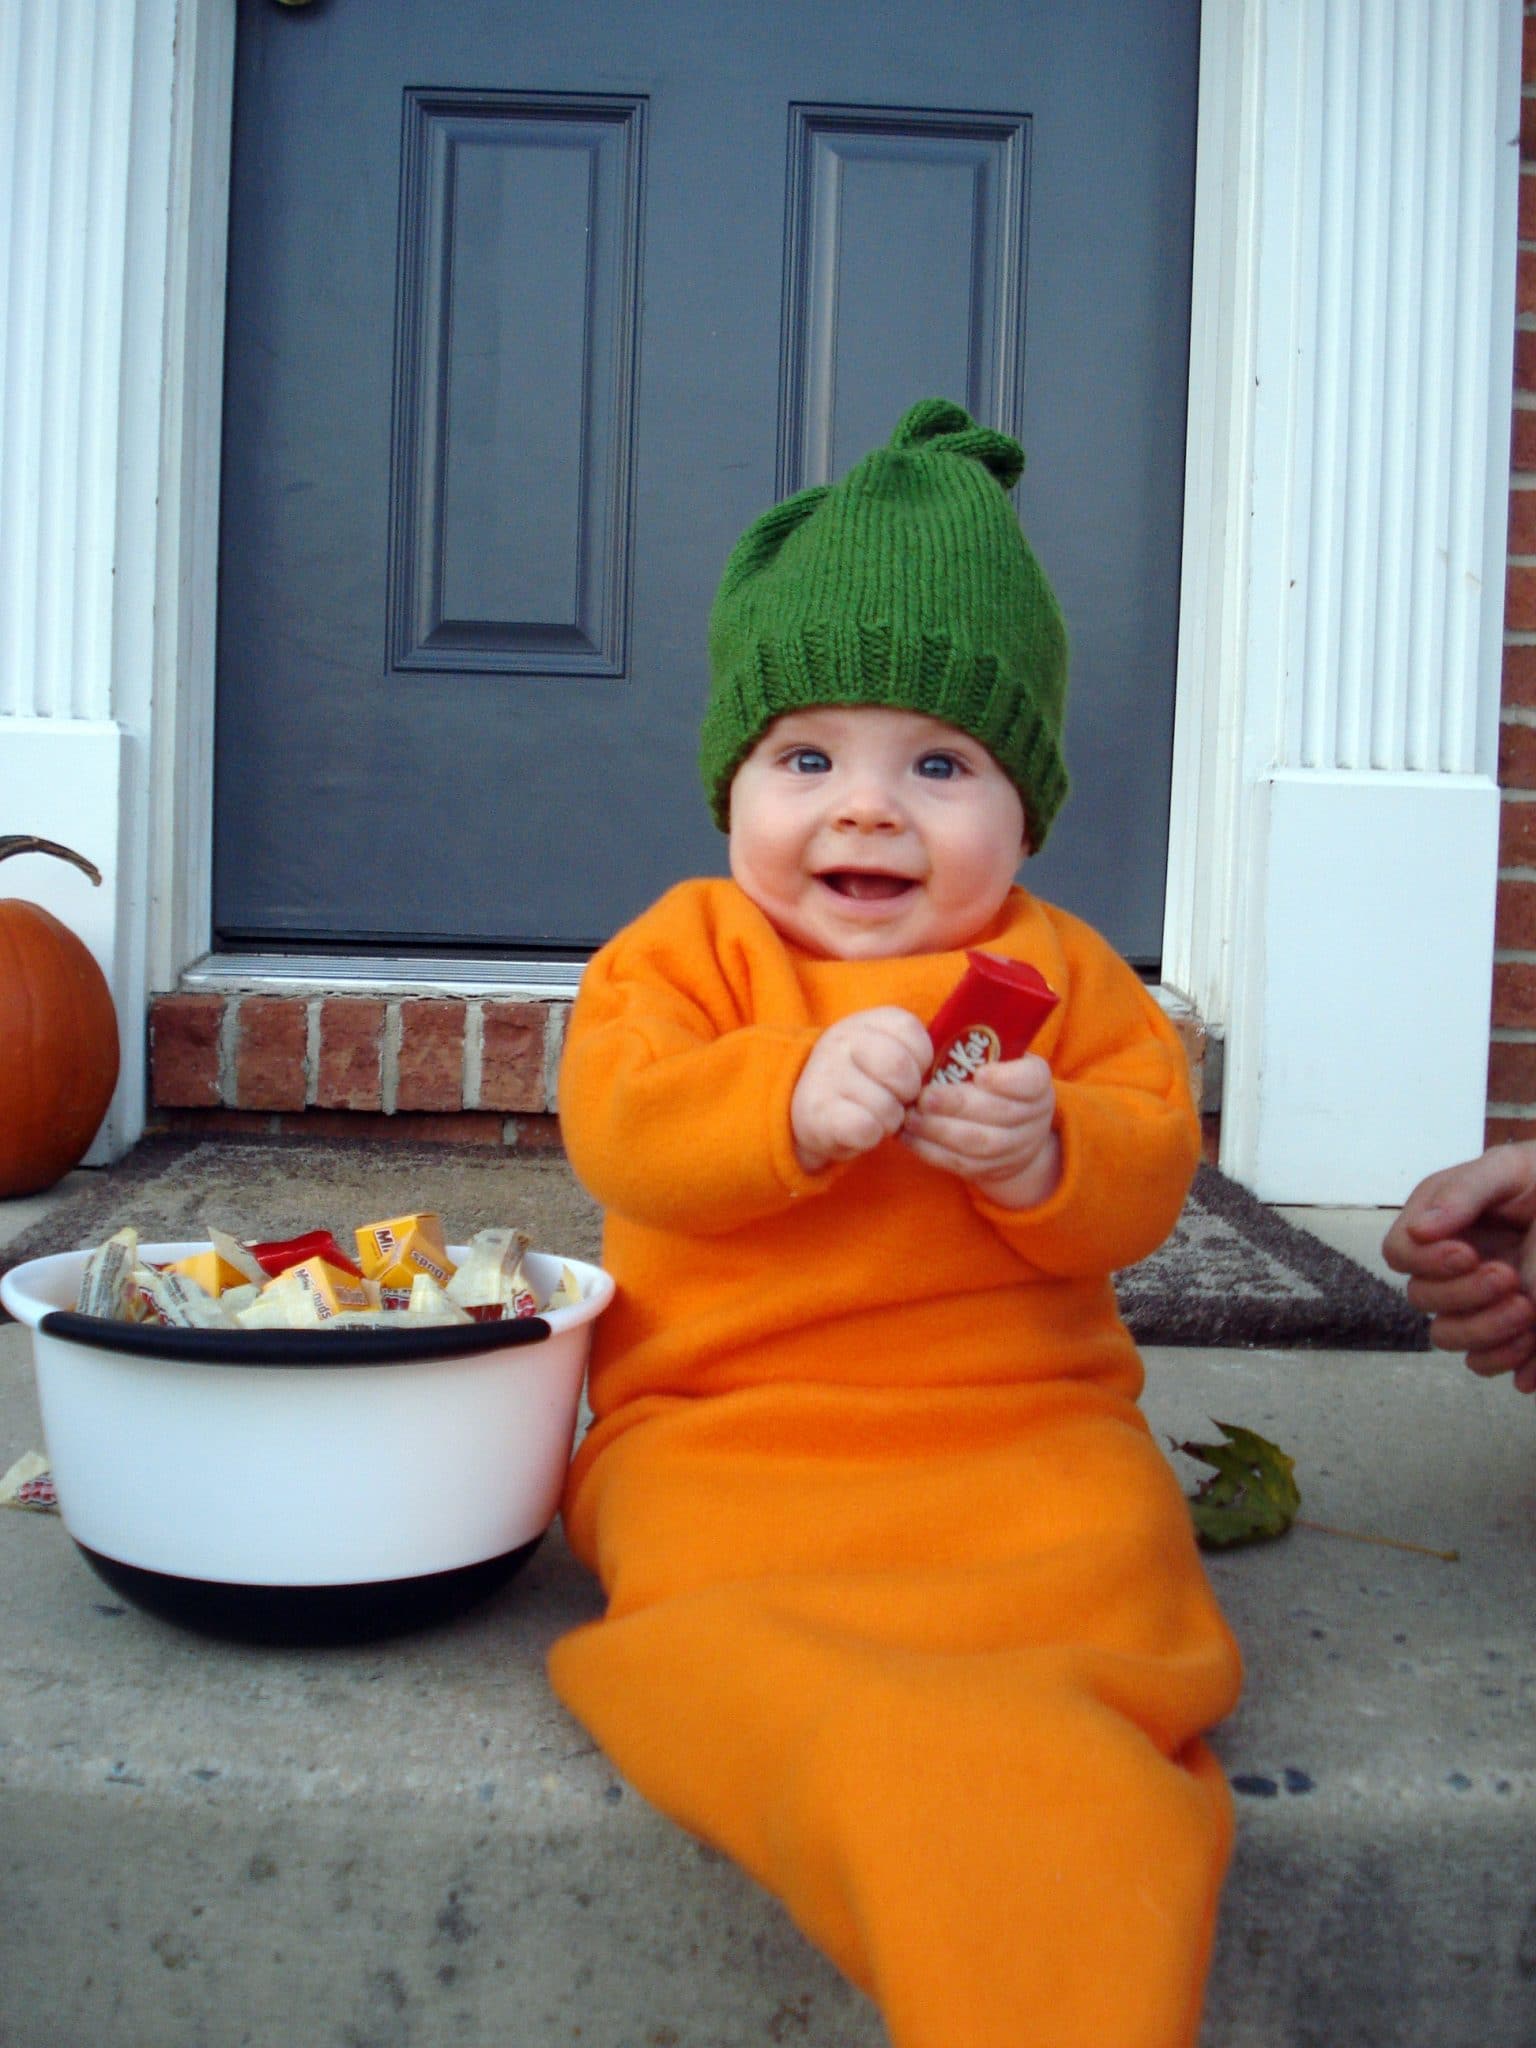 Baby dressed as carrot on front porch with bowl of candy